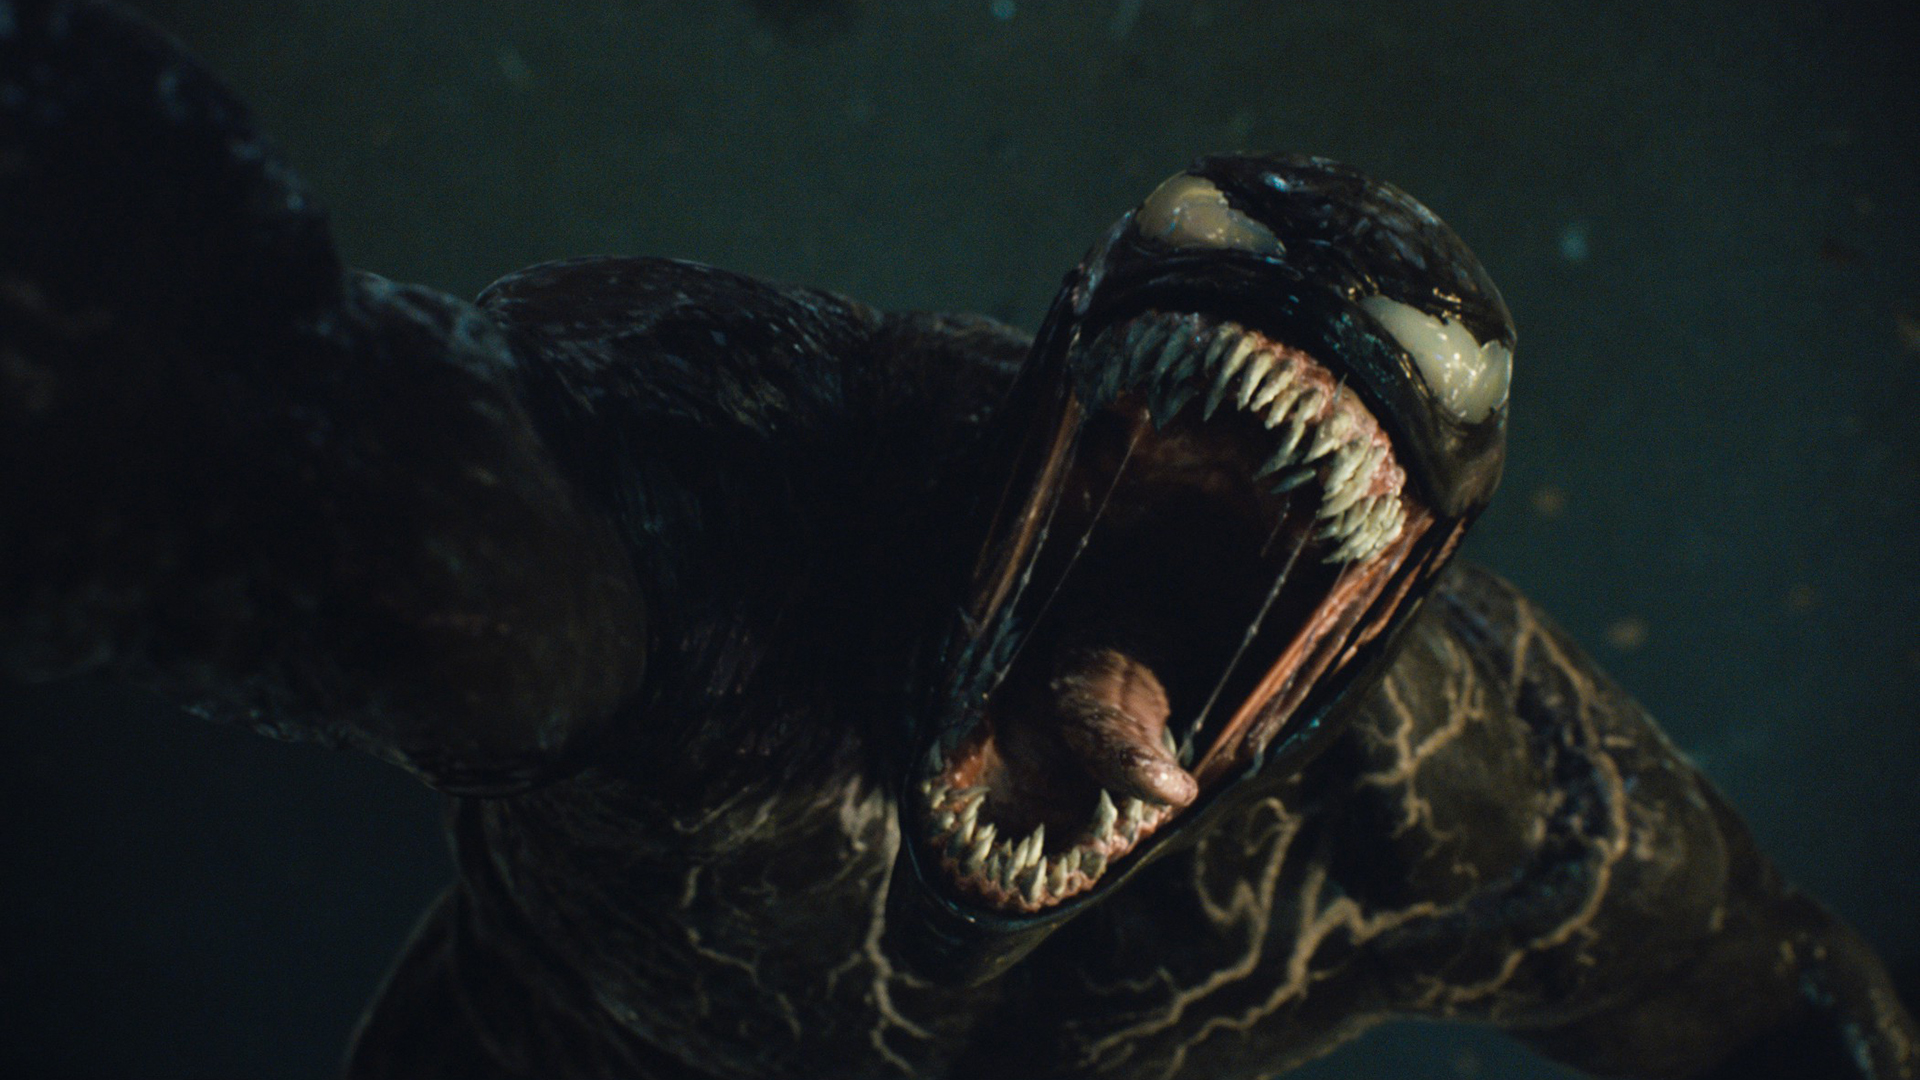 "Venom" stars Tom Hardy and is written by Scott Rosenberg, Jeff Pinkner and Kelly Marcel.  (Sony Pictures)